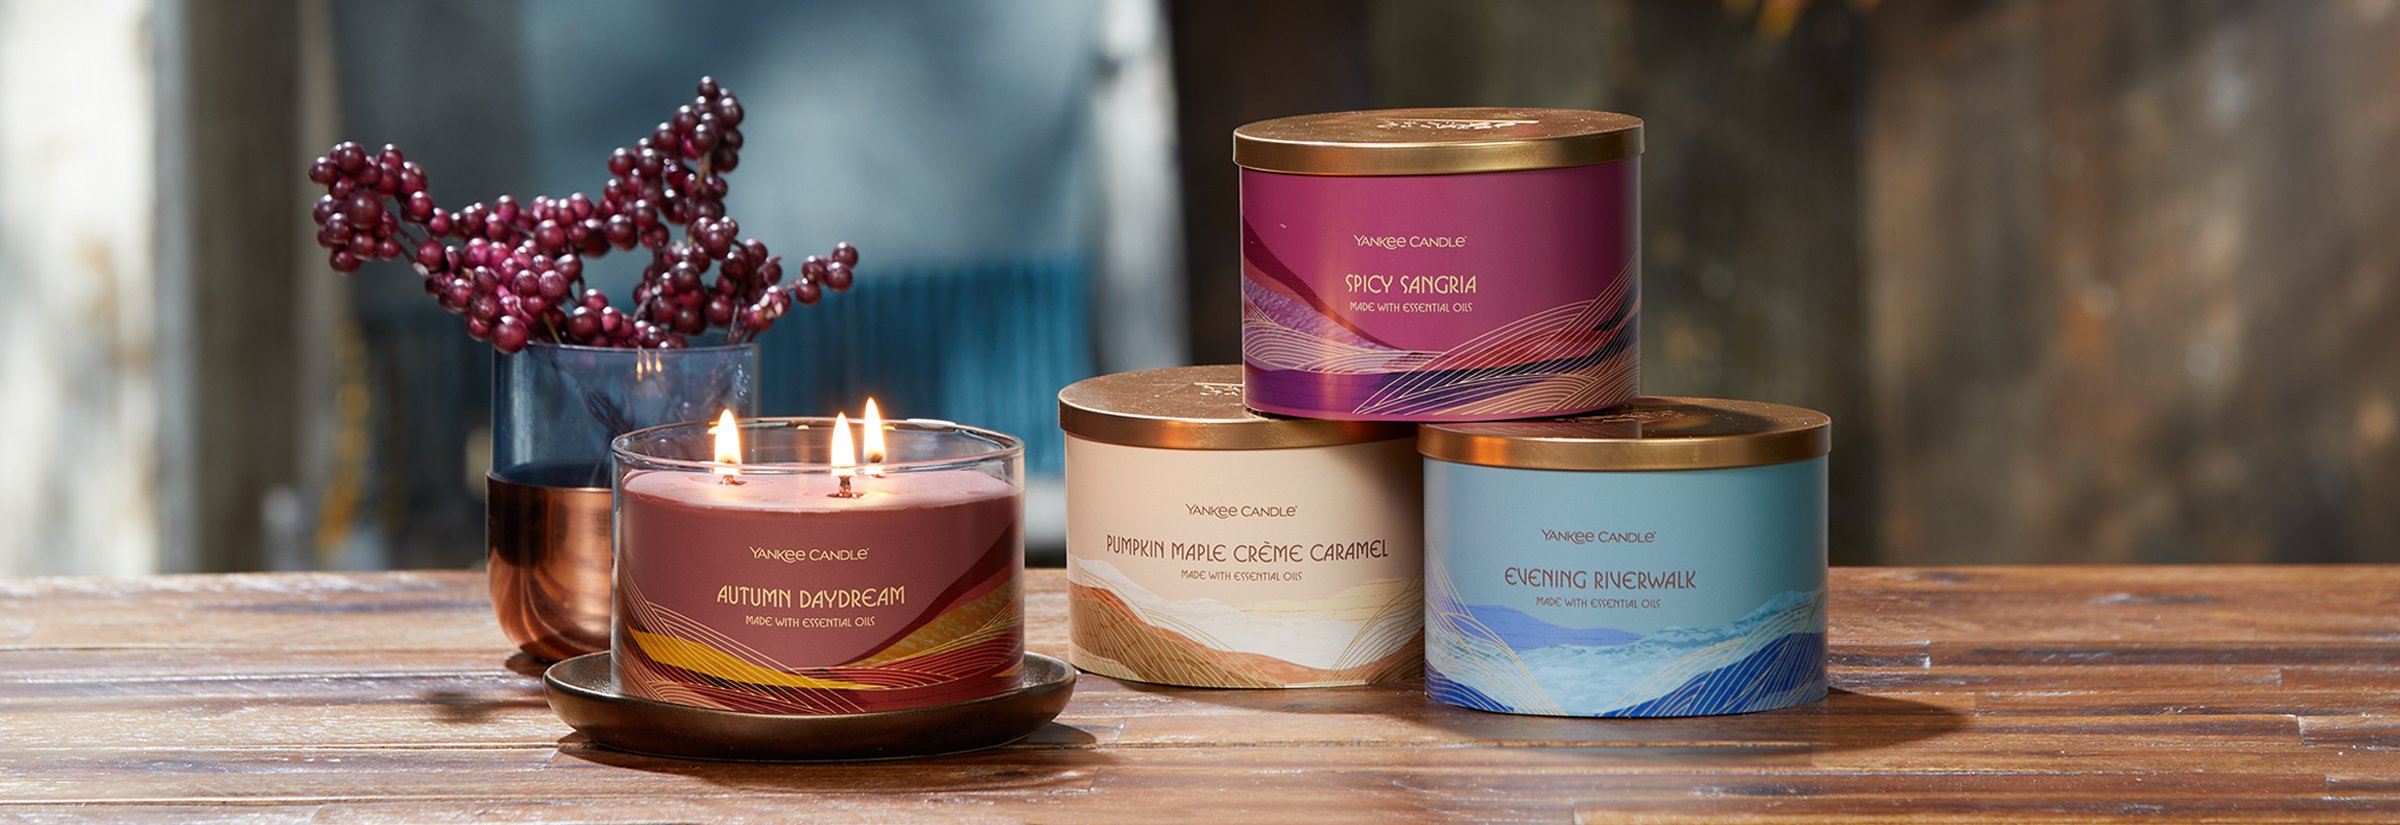 Yankee Candle Is 'Daydreaming of Autumn' With These 5 New Fragrances -  Gifts & Decorative Accessories